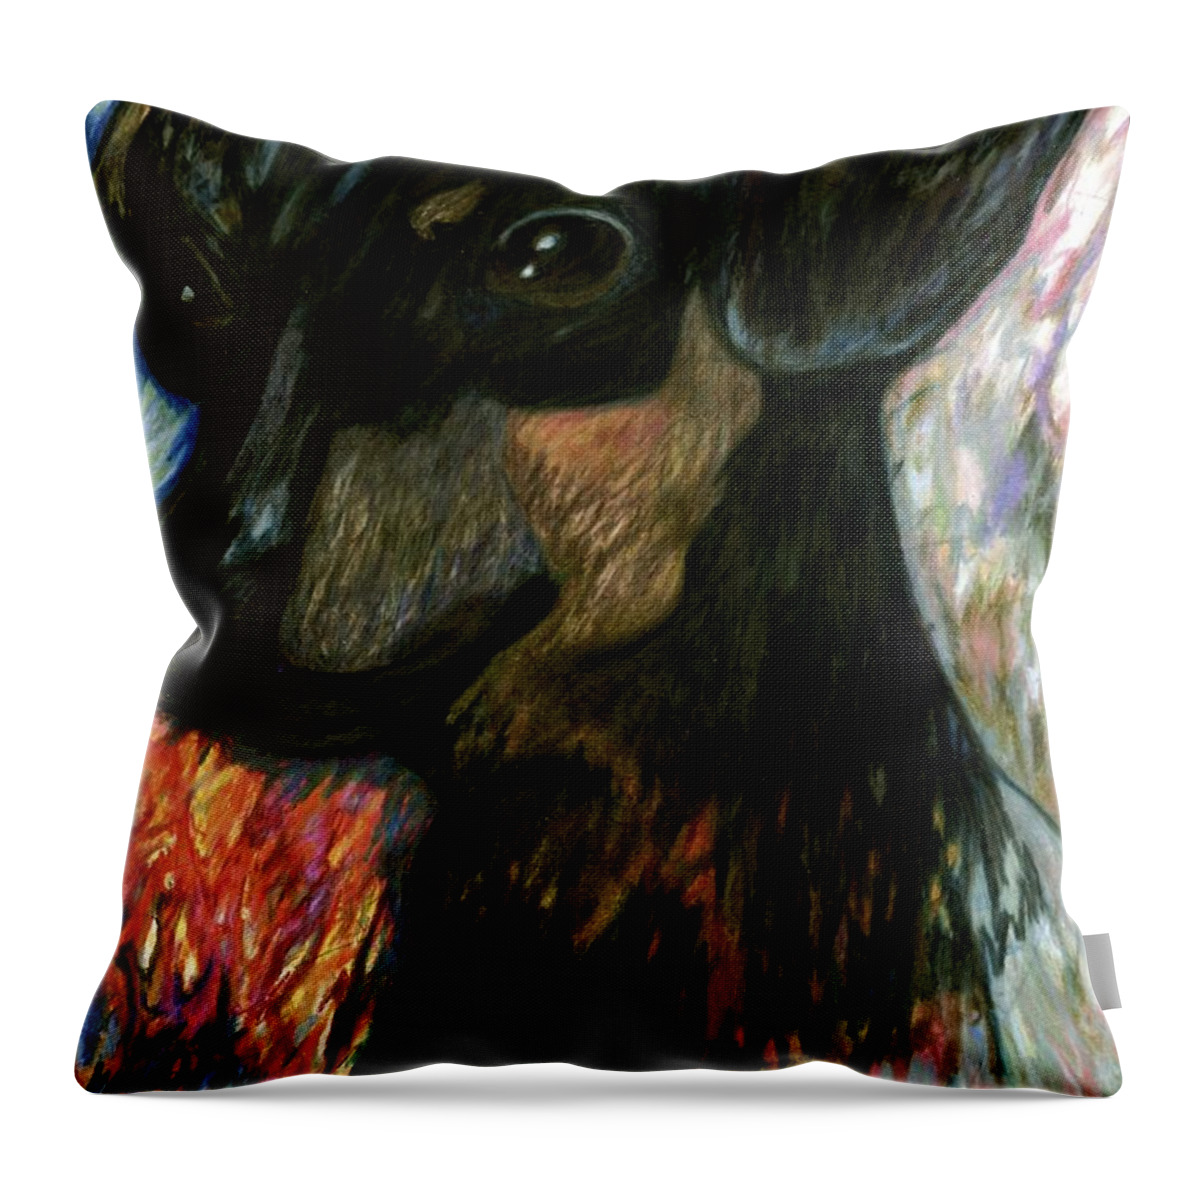 A Great Loyal Dog Throw Pillow featuring the drawing Max by Jon Kittleson